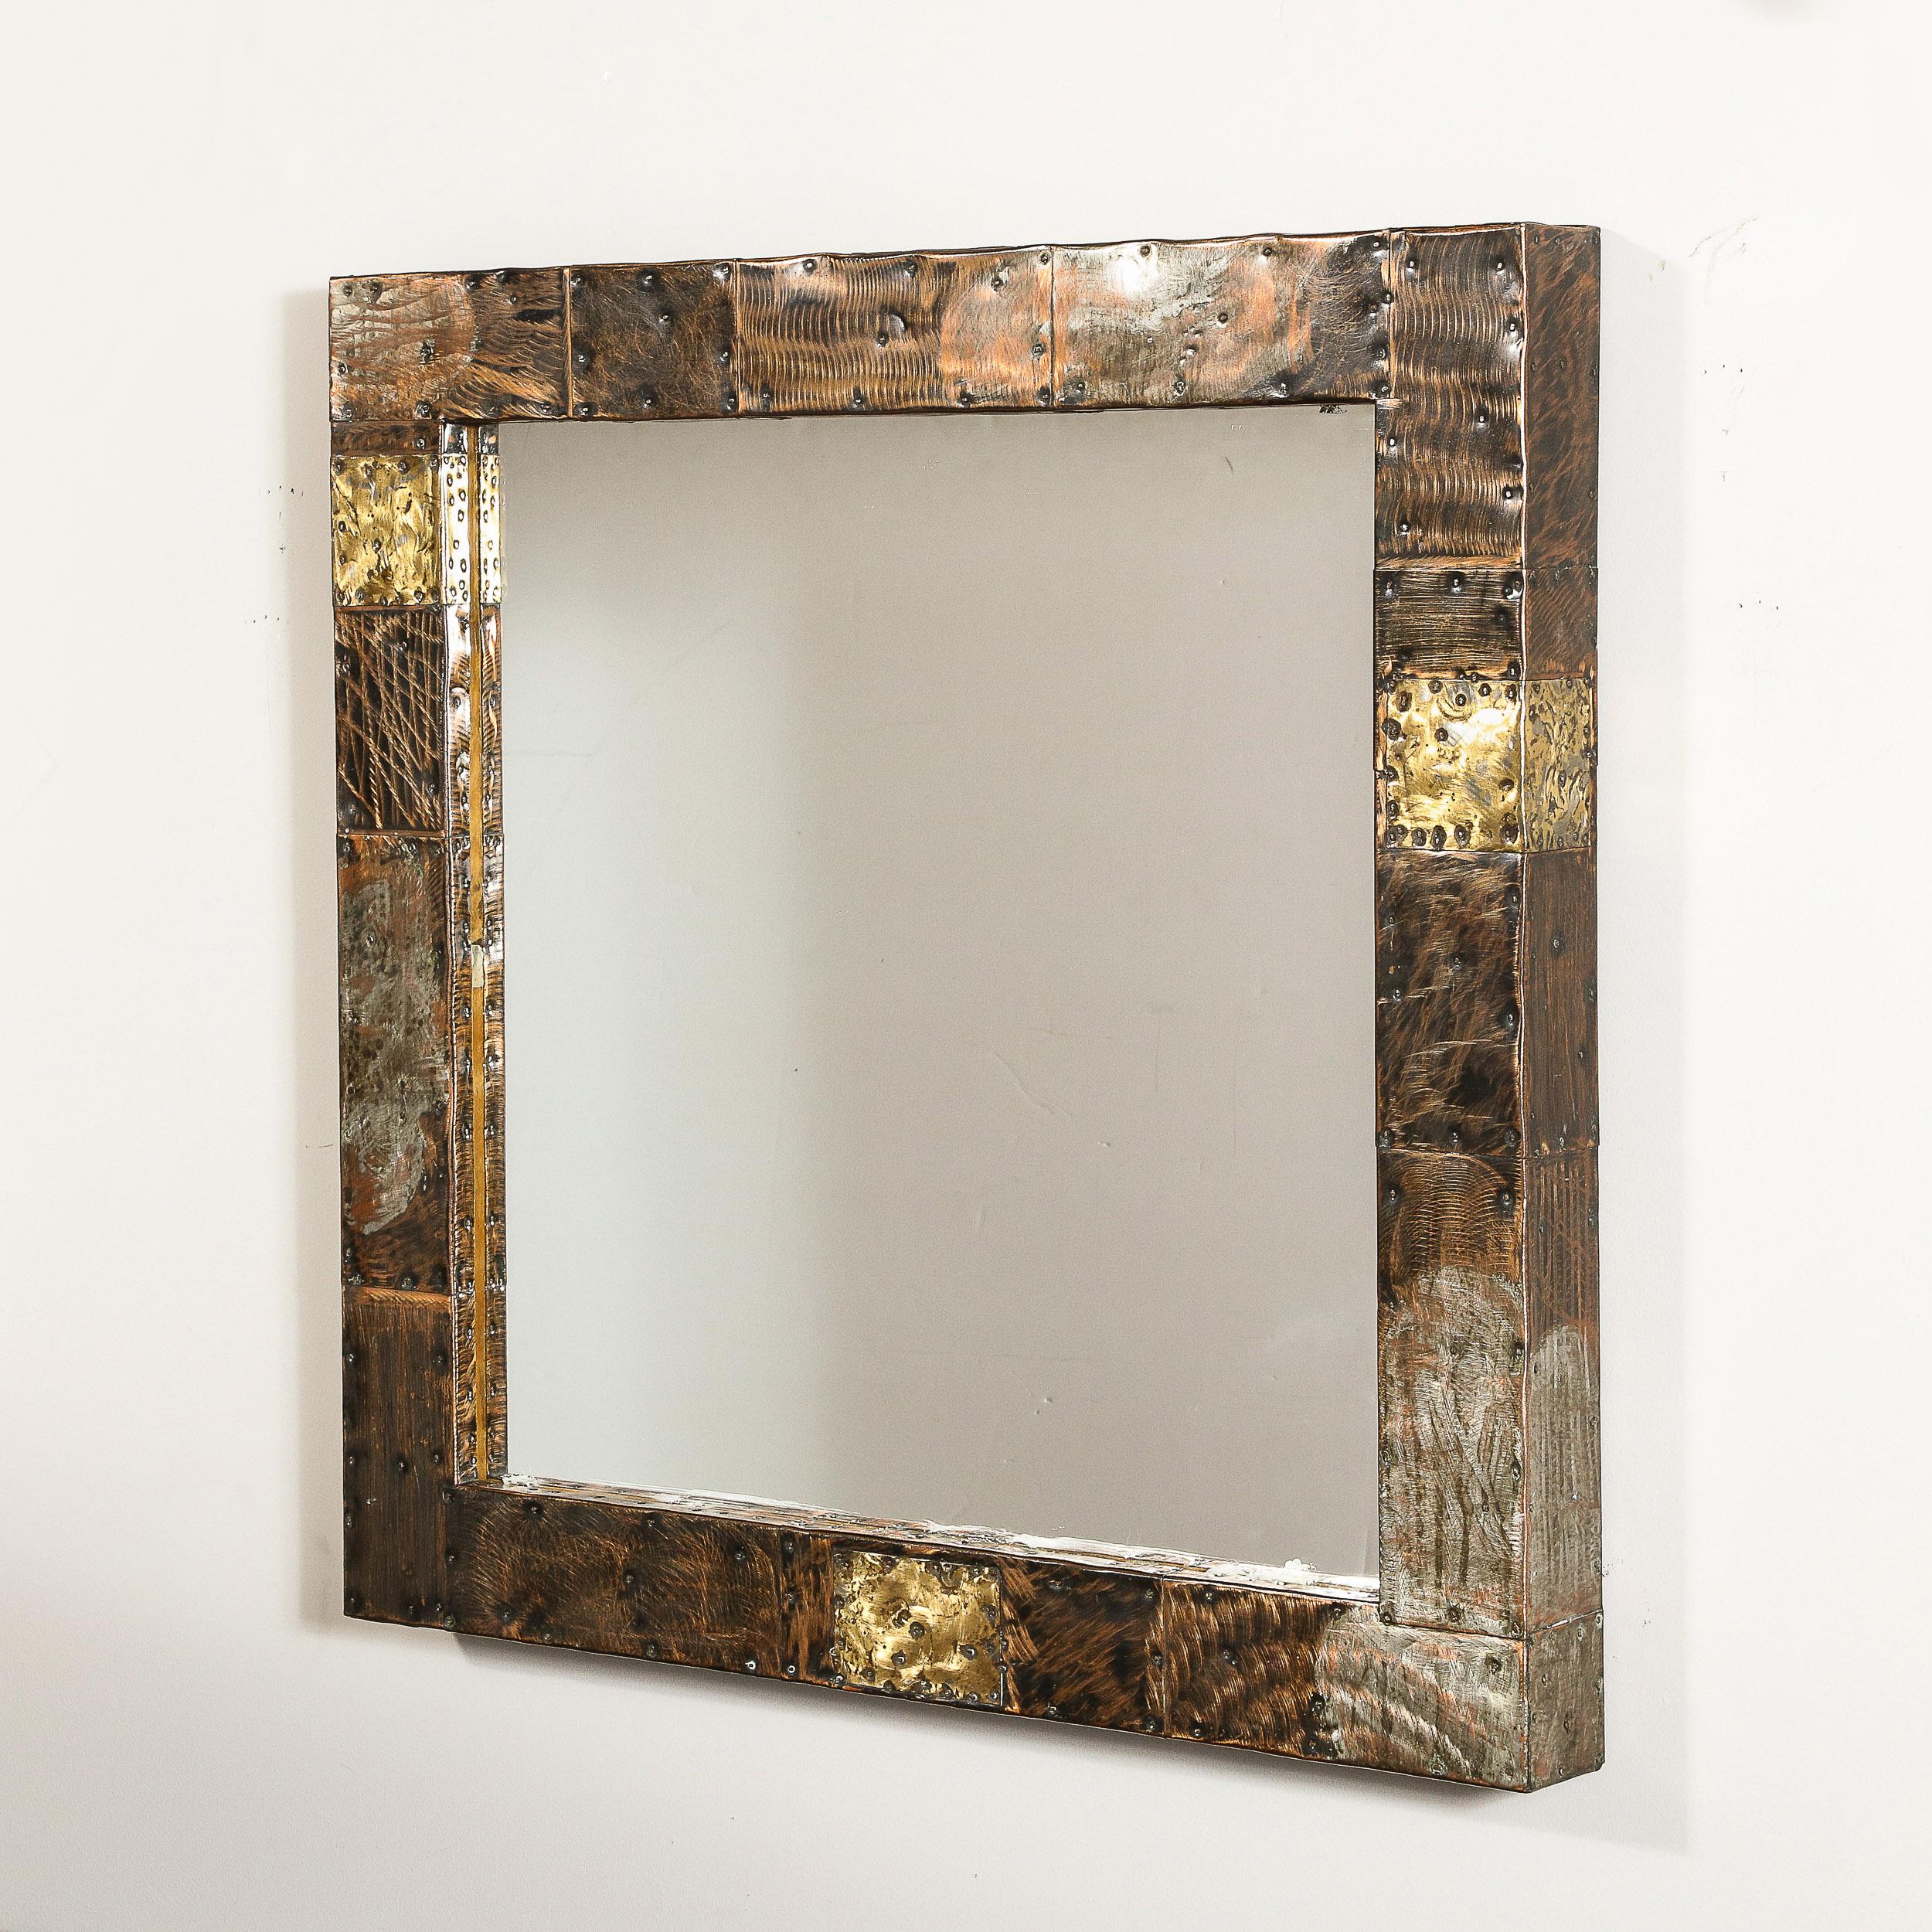 This striking and rare Mid-Century Brutalist Patchwork Mirror was made by Paul Evans and originates from the United States Circa 1970. Featuring a bold and beautifully crafted square frame in the Patchwork technique Evans has explored through his